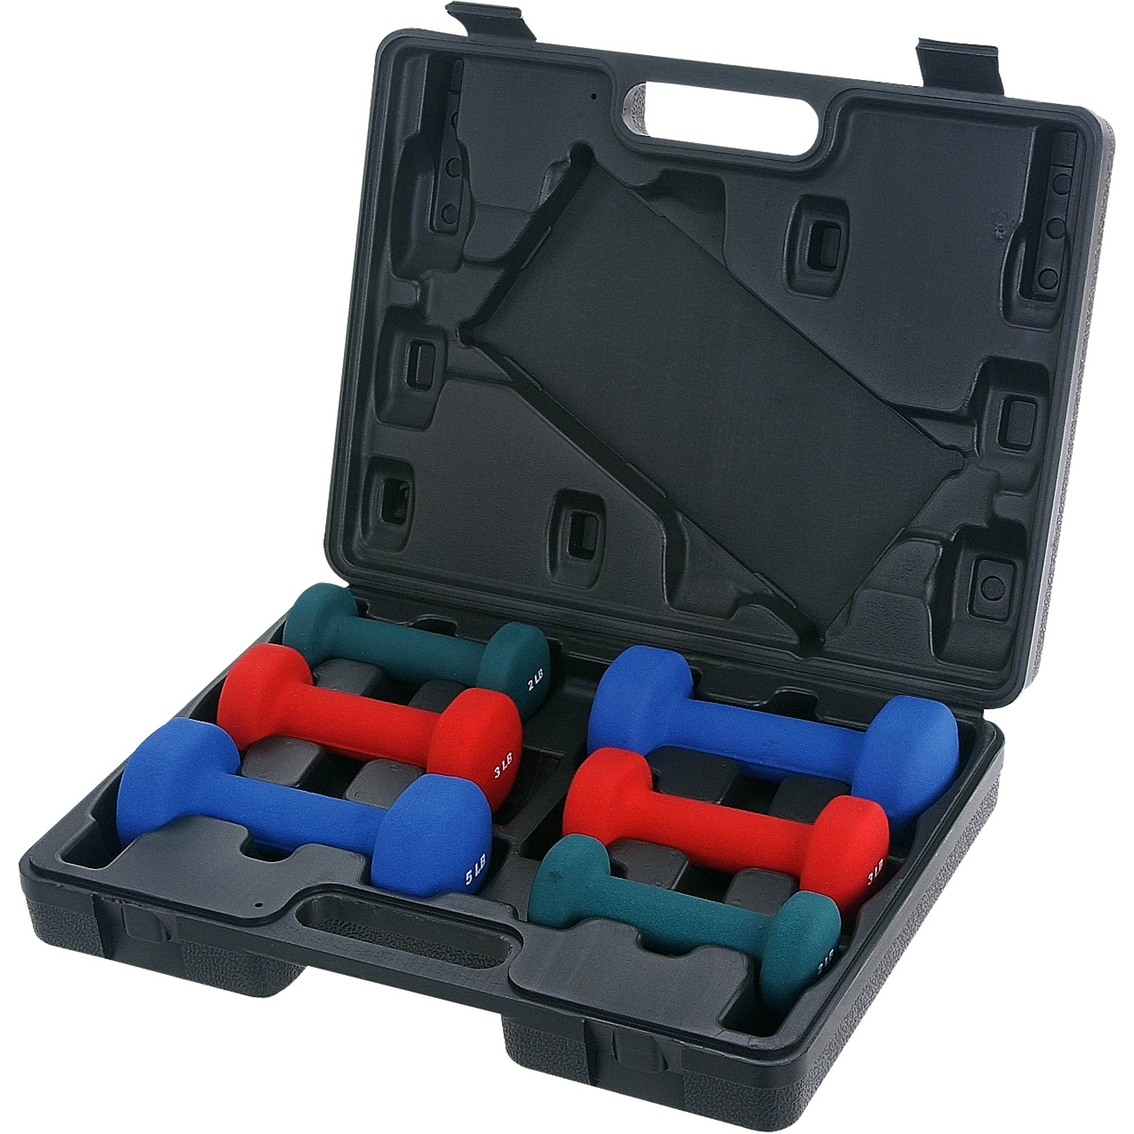 Sunny Health and Fitness Neoprene Dumbbell Set With Case - Image 2 of 2